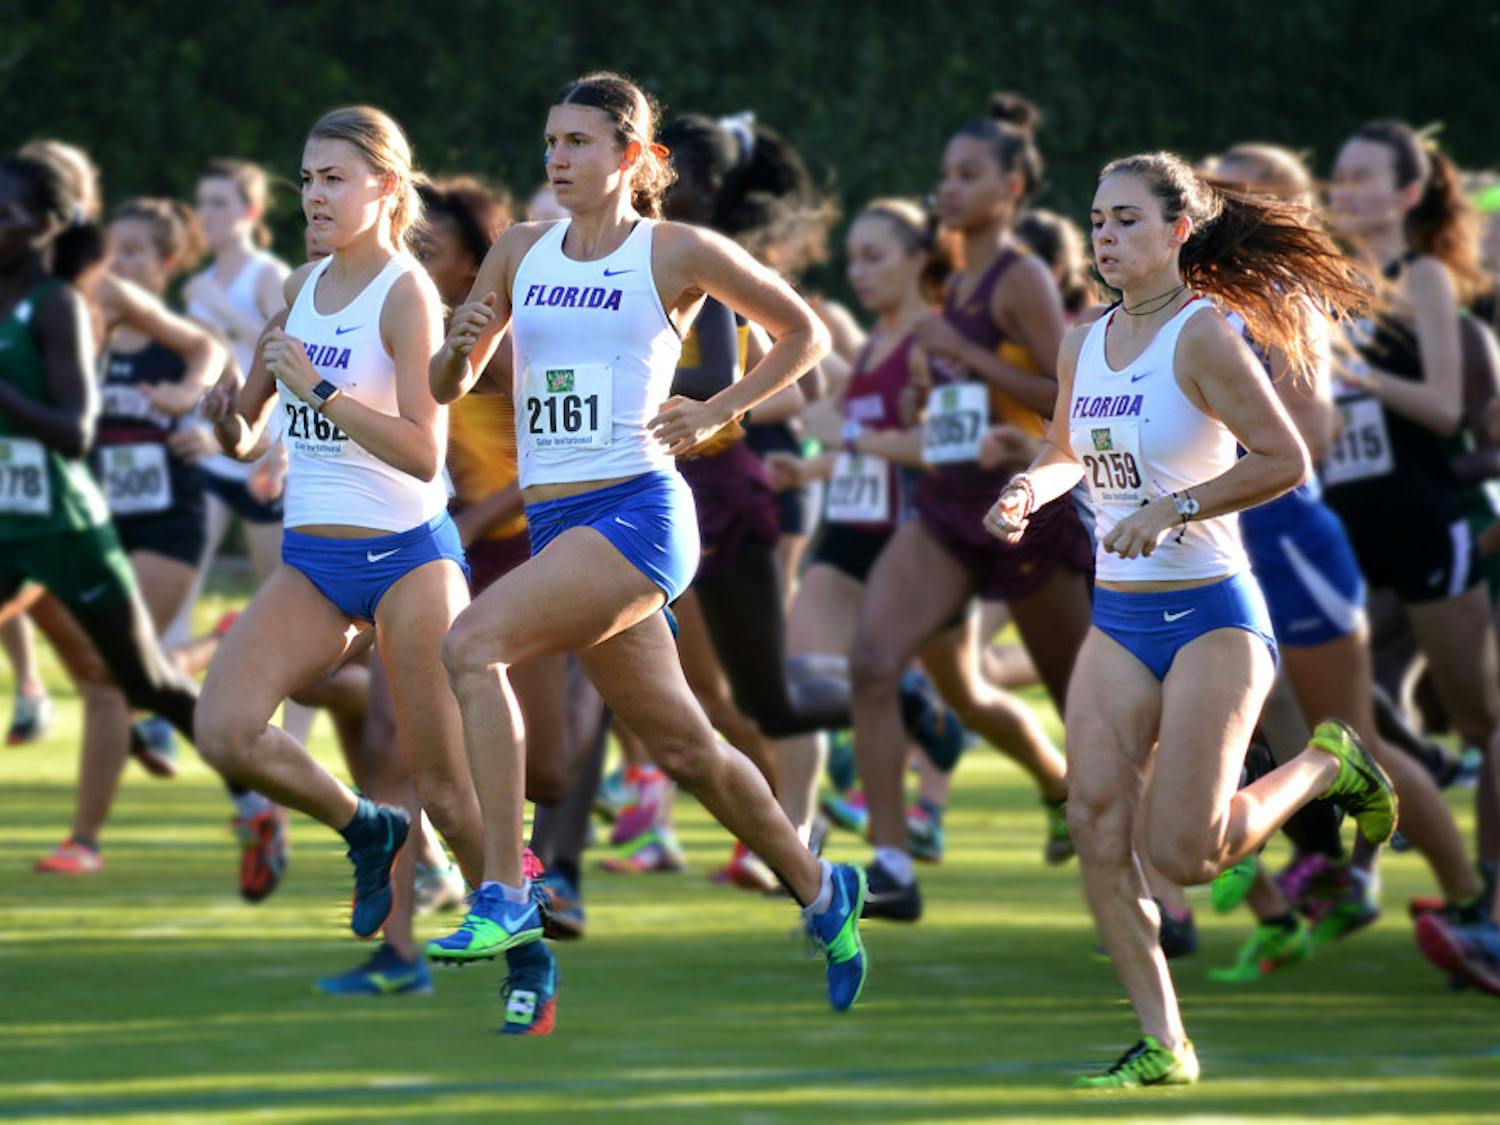 The Gators men’s and women's cross country teams ended their season at the NCAA South Regional Championship Friday. Junior Caitlin McQuilkin-Bell finished first overall for the Gators in 51st with a time of 21:17.8, a career best. 